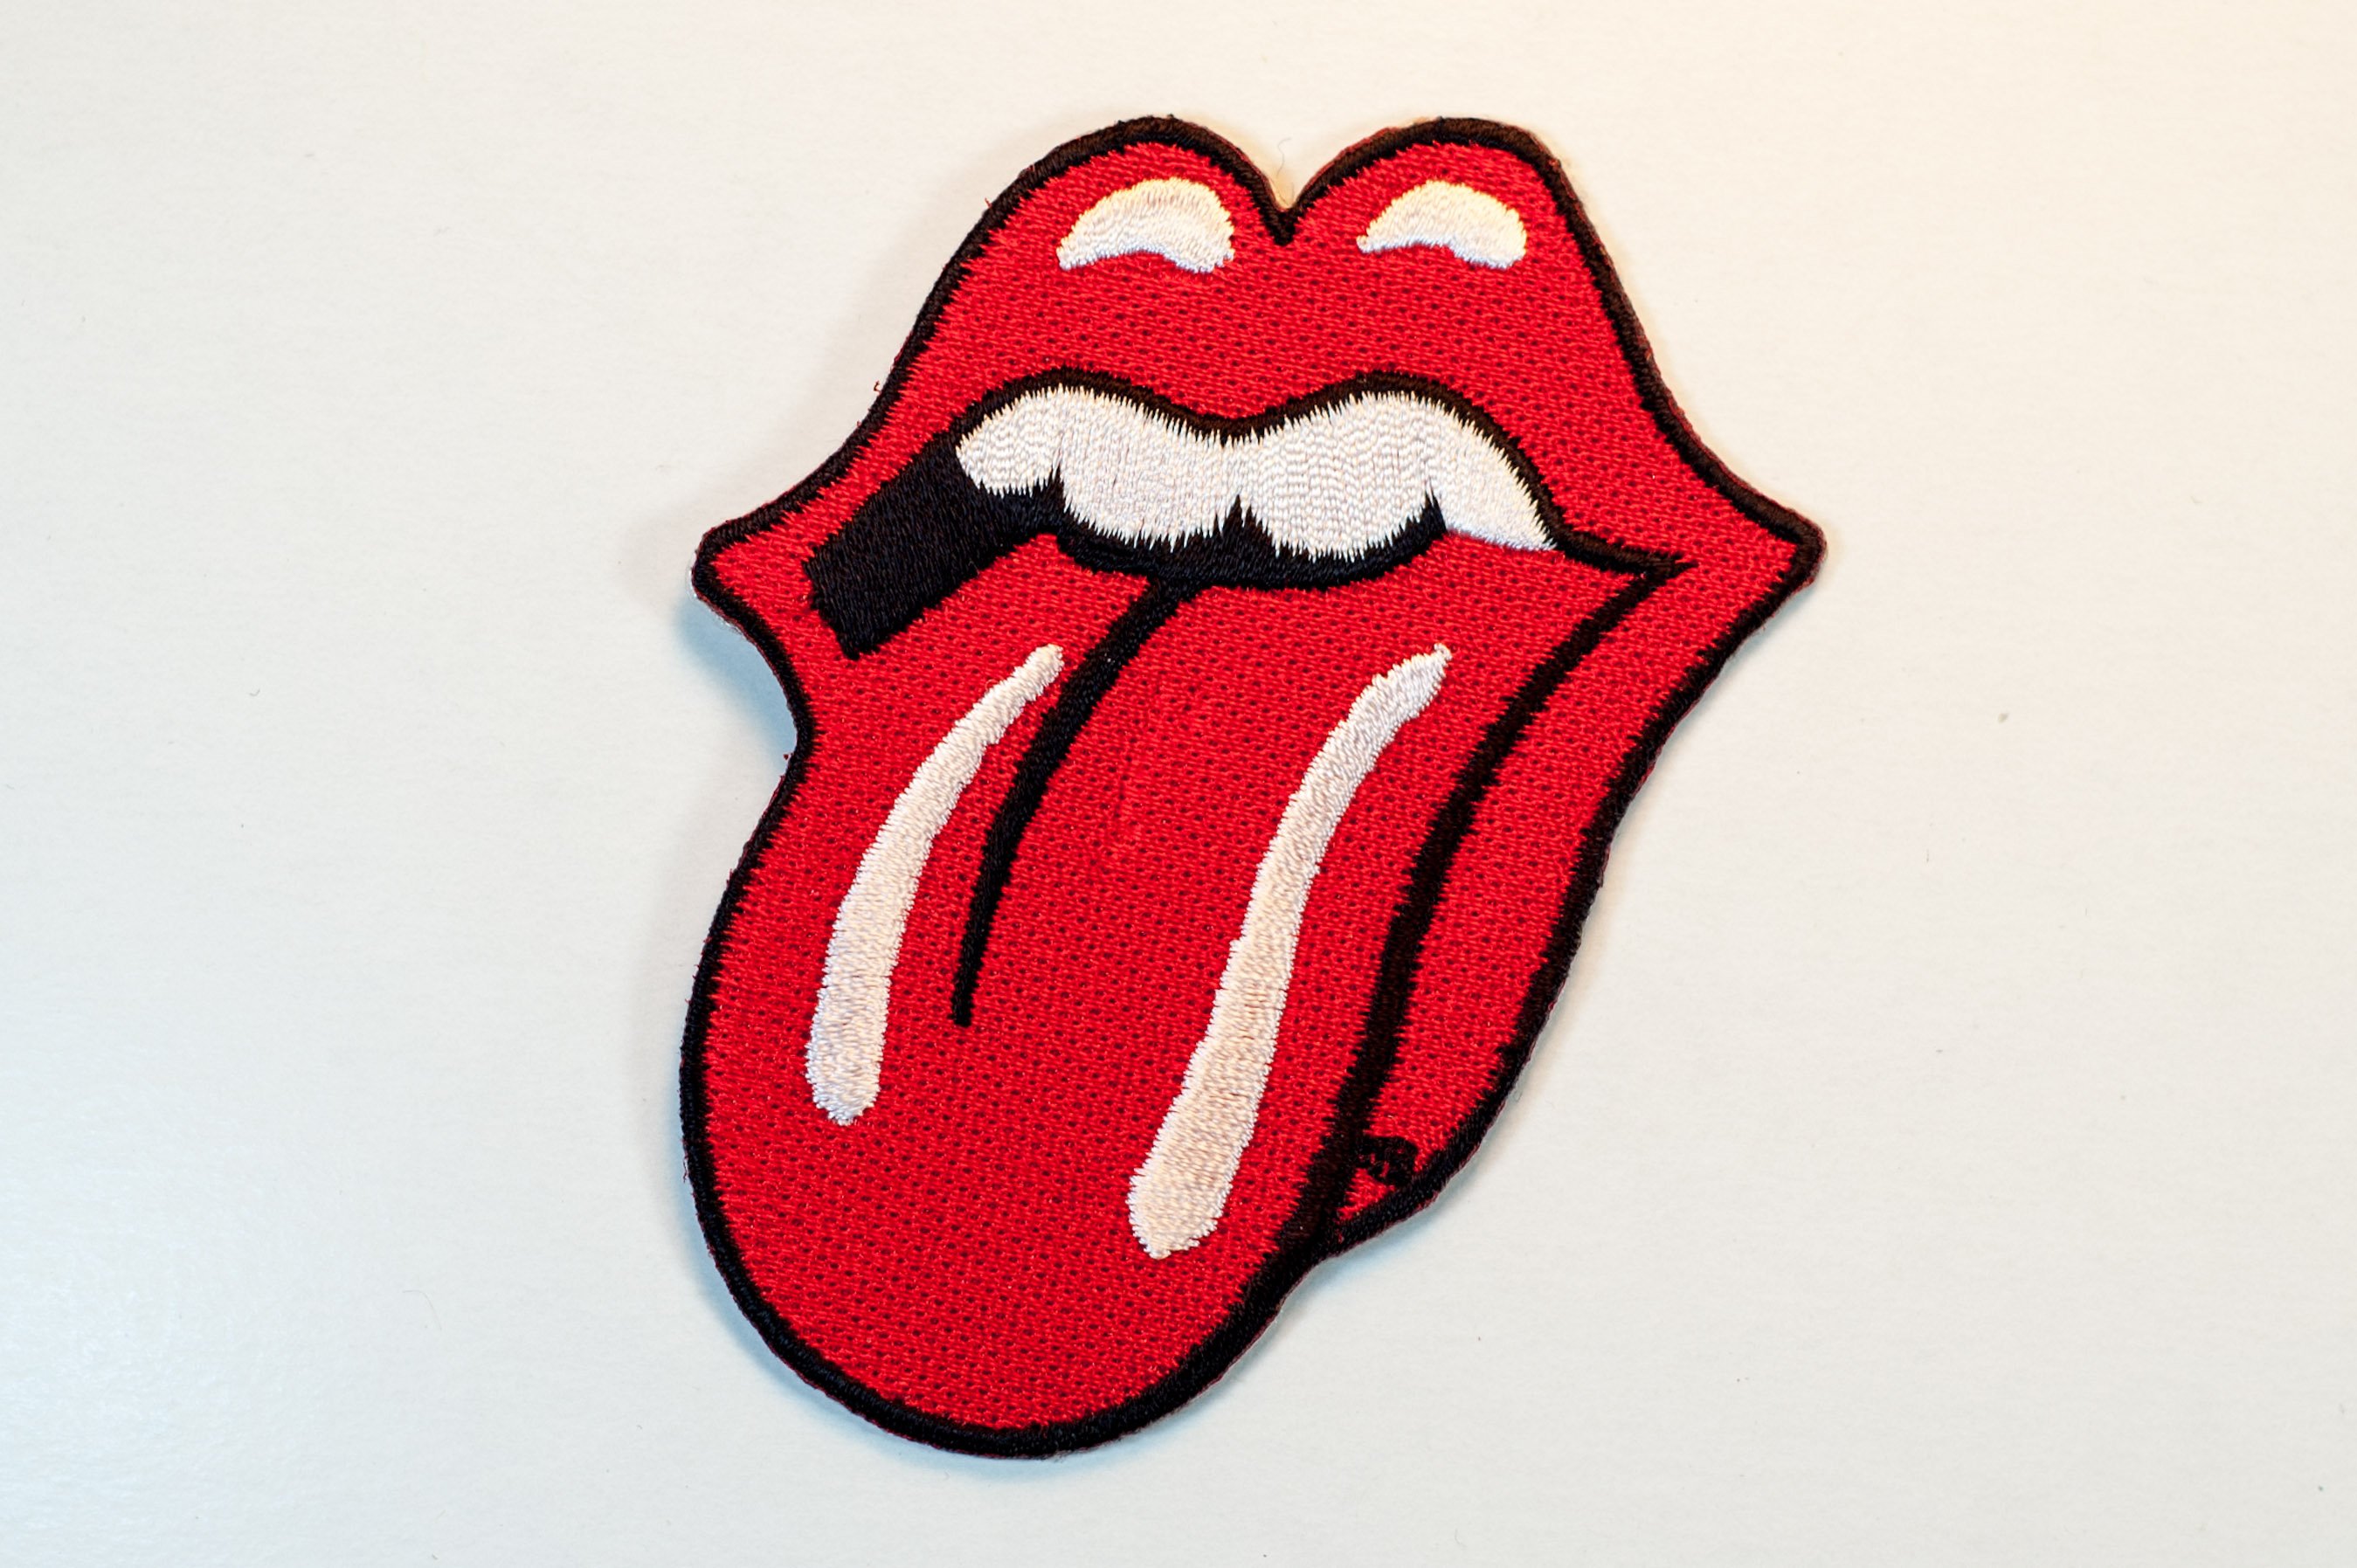 rolling stones logo   Images Search Pasutri